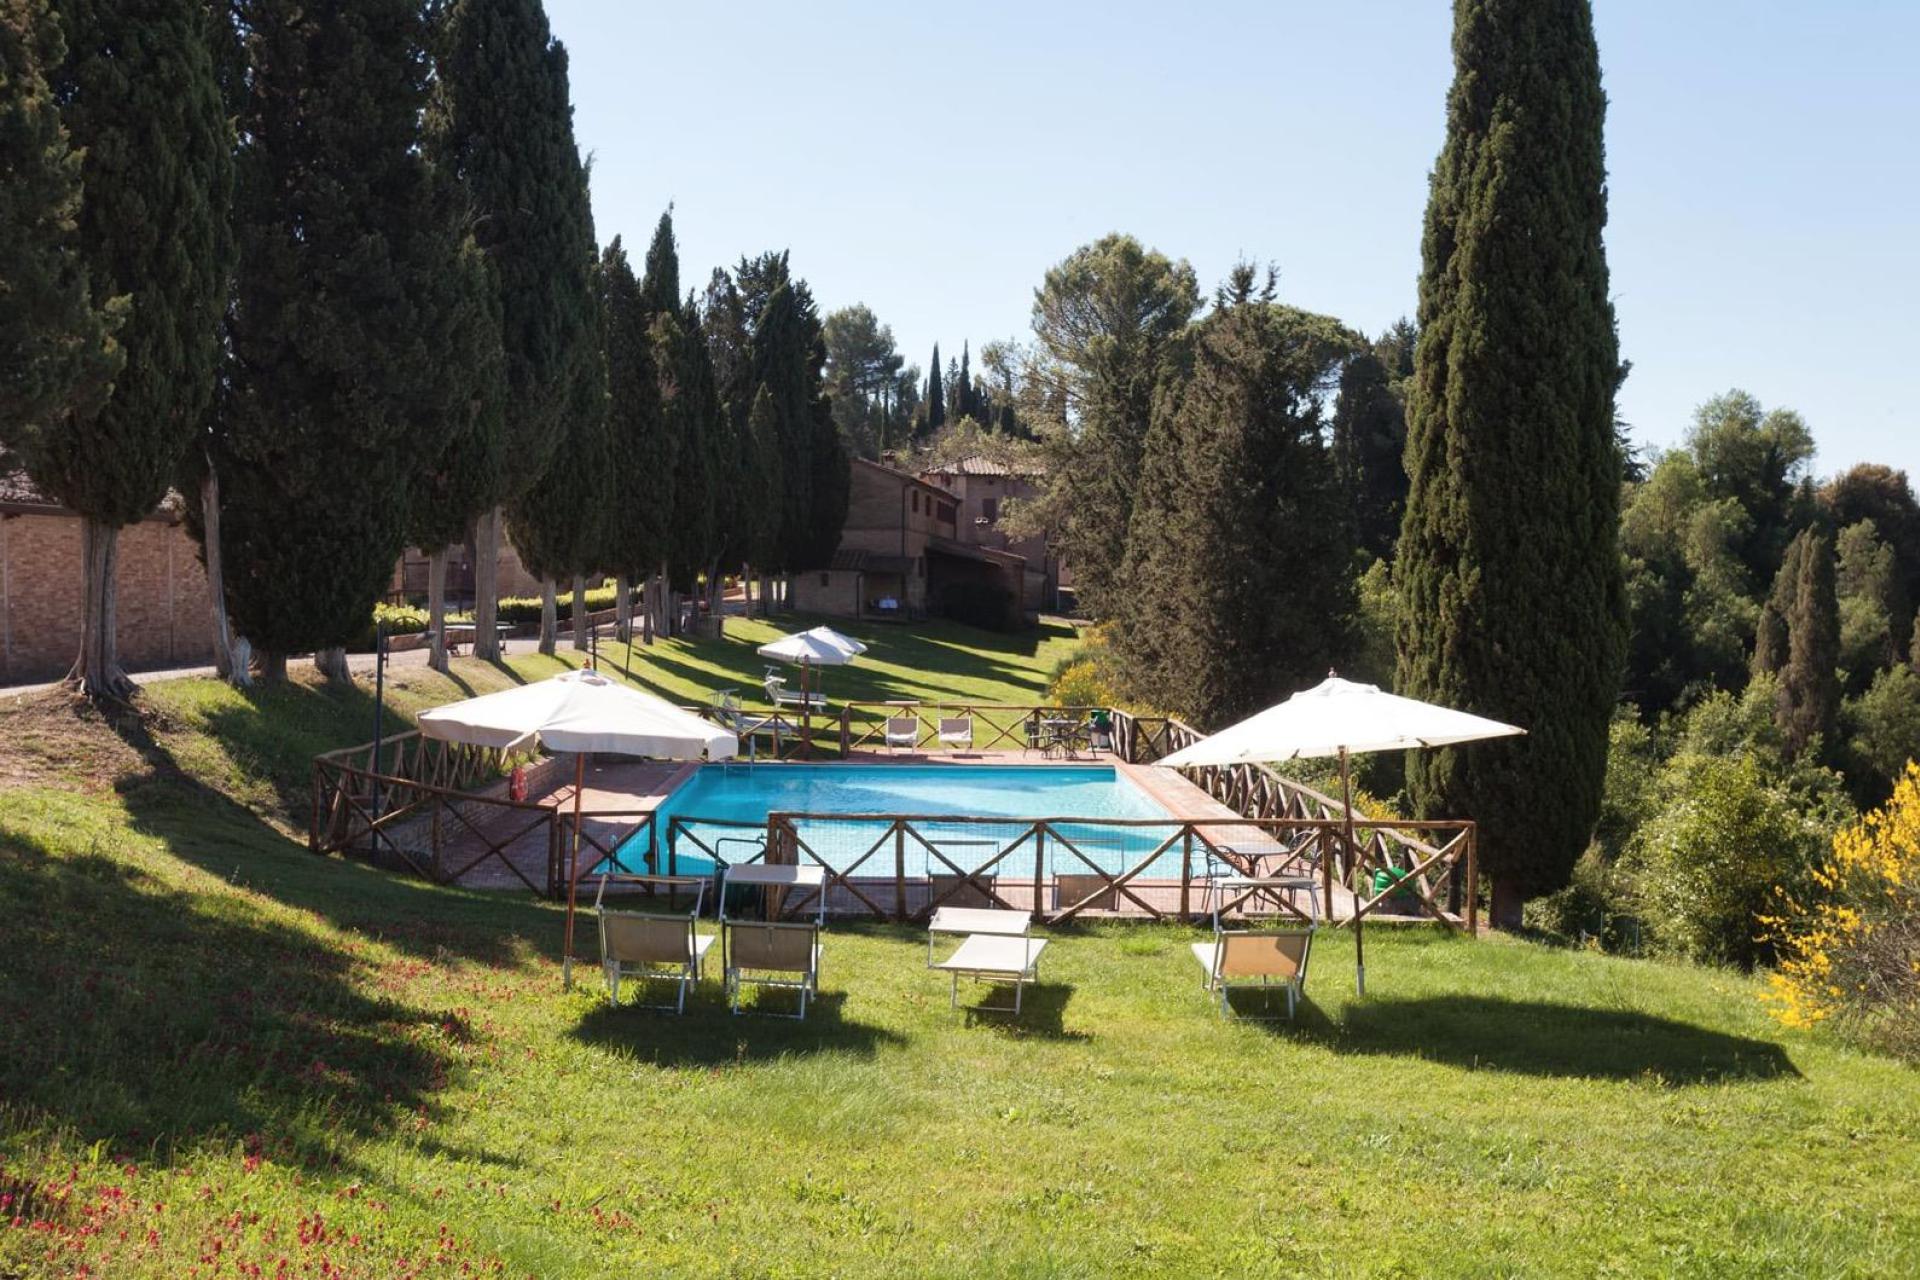 1. Agriturismo in the hills near Siena